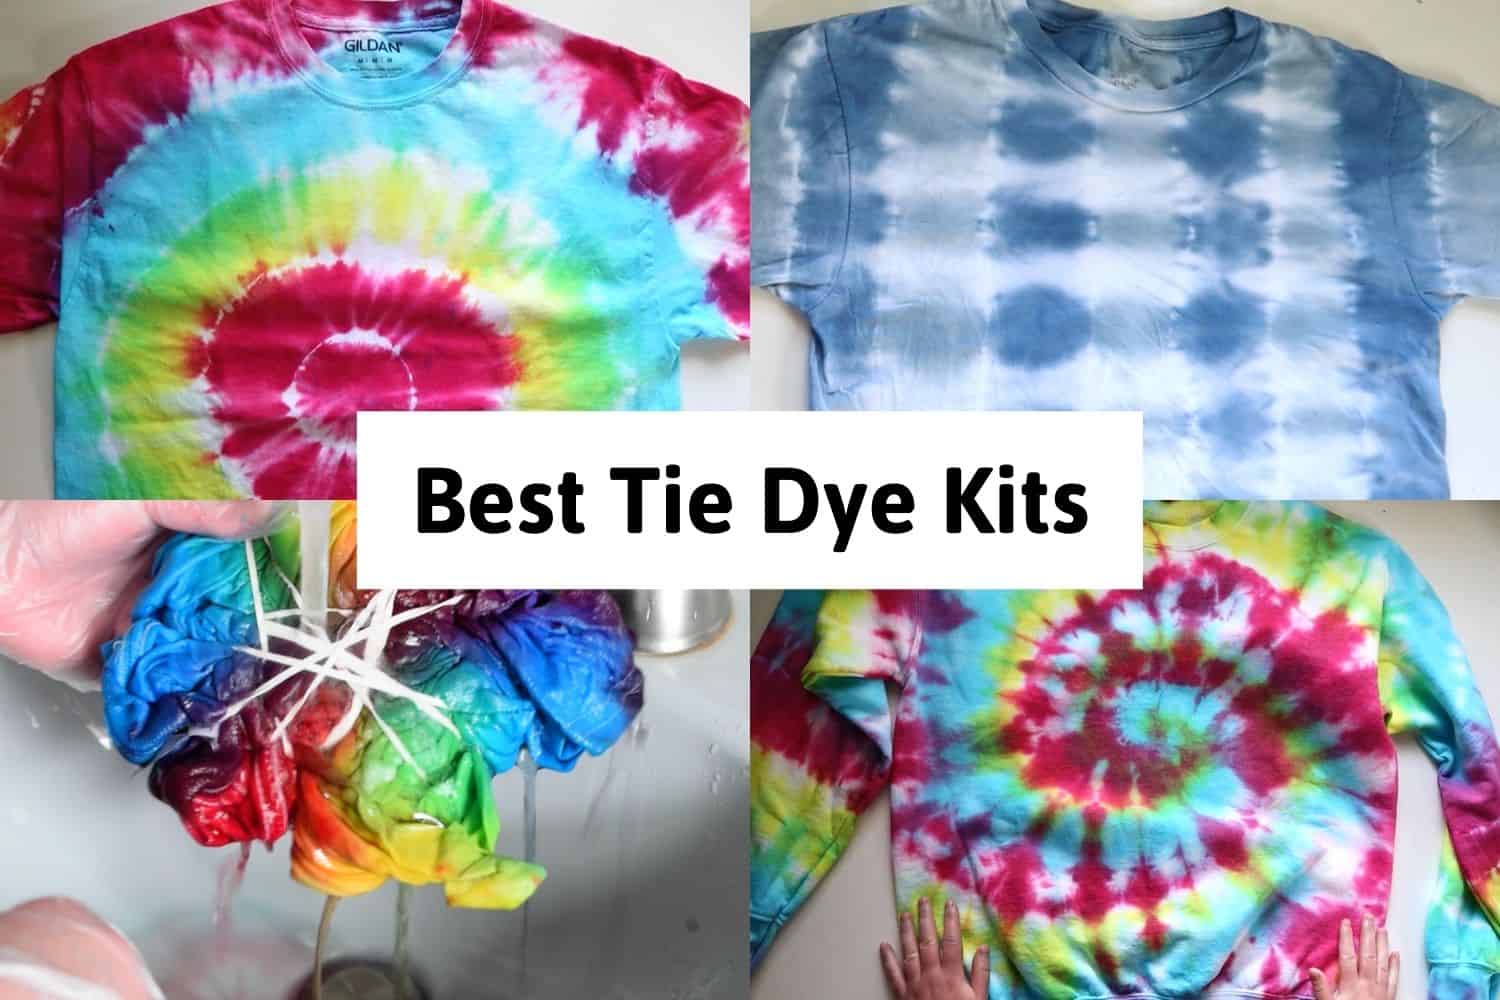 12 Packs of Soda Ash and 10 Pairs of Gloves for Tie Dye Shirts DIY